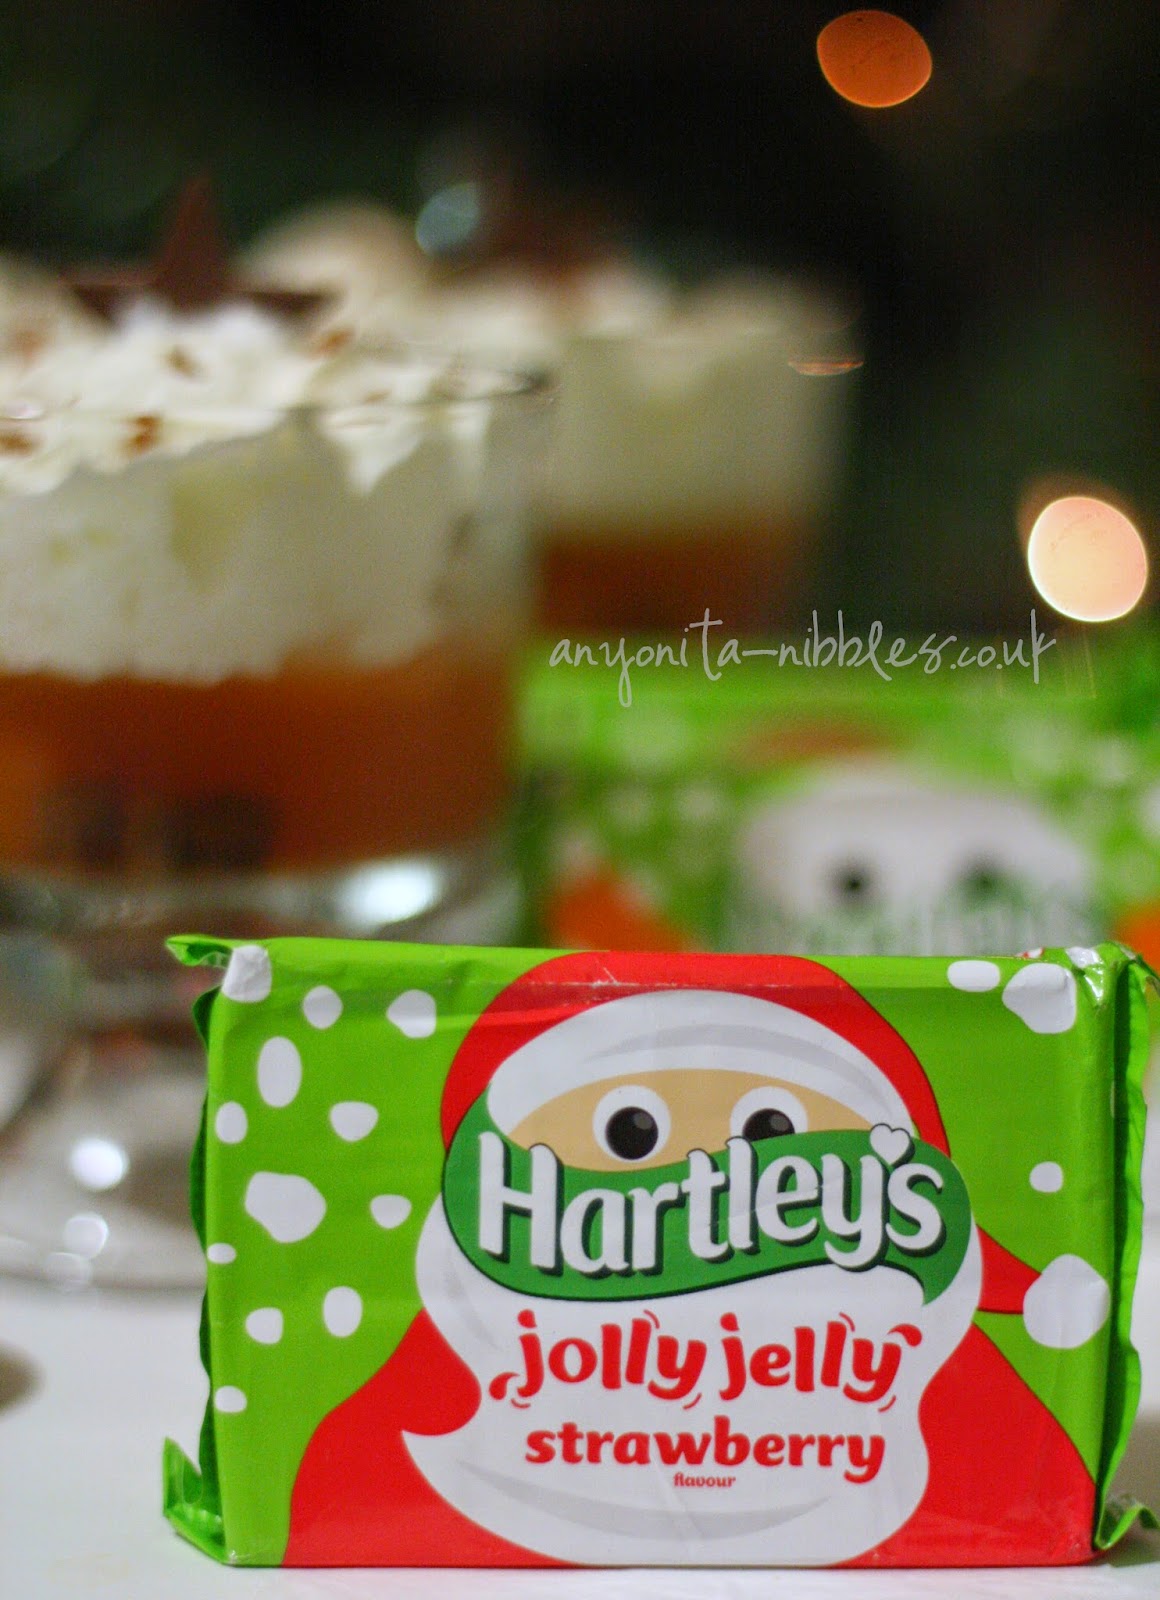 Make your Christmas festive with Hartley's Jolly Jelly from Anyonita-nibbles.co.uk